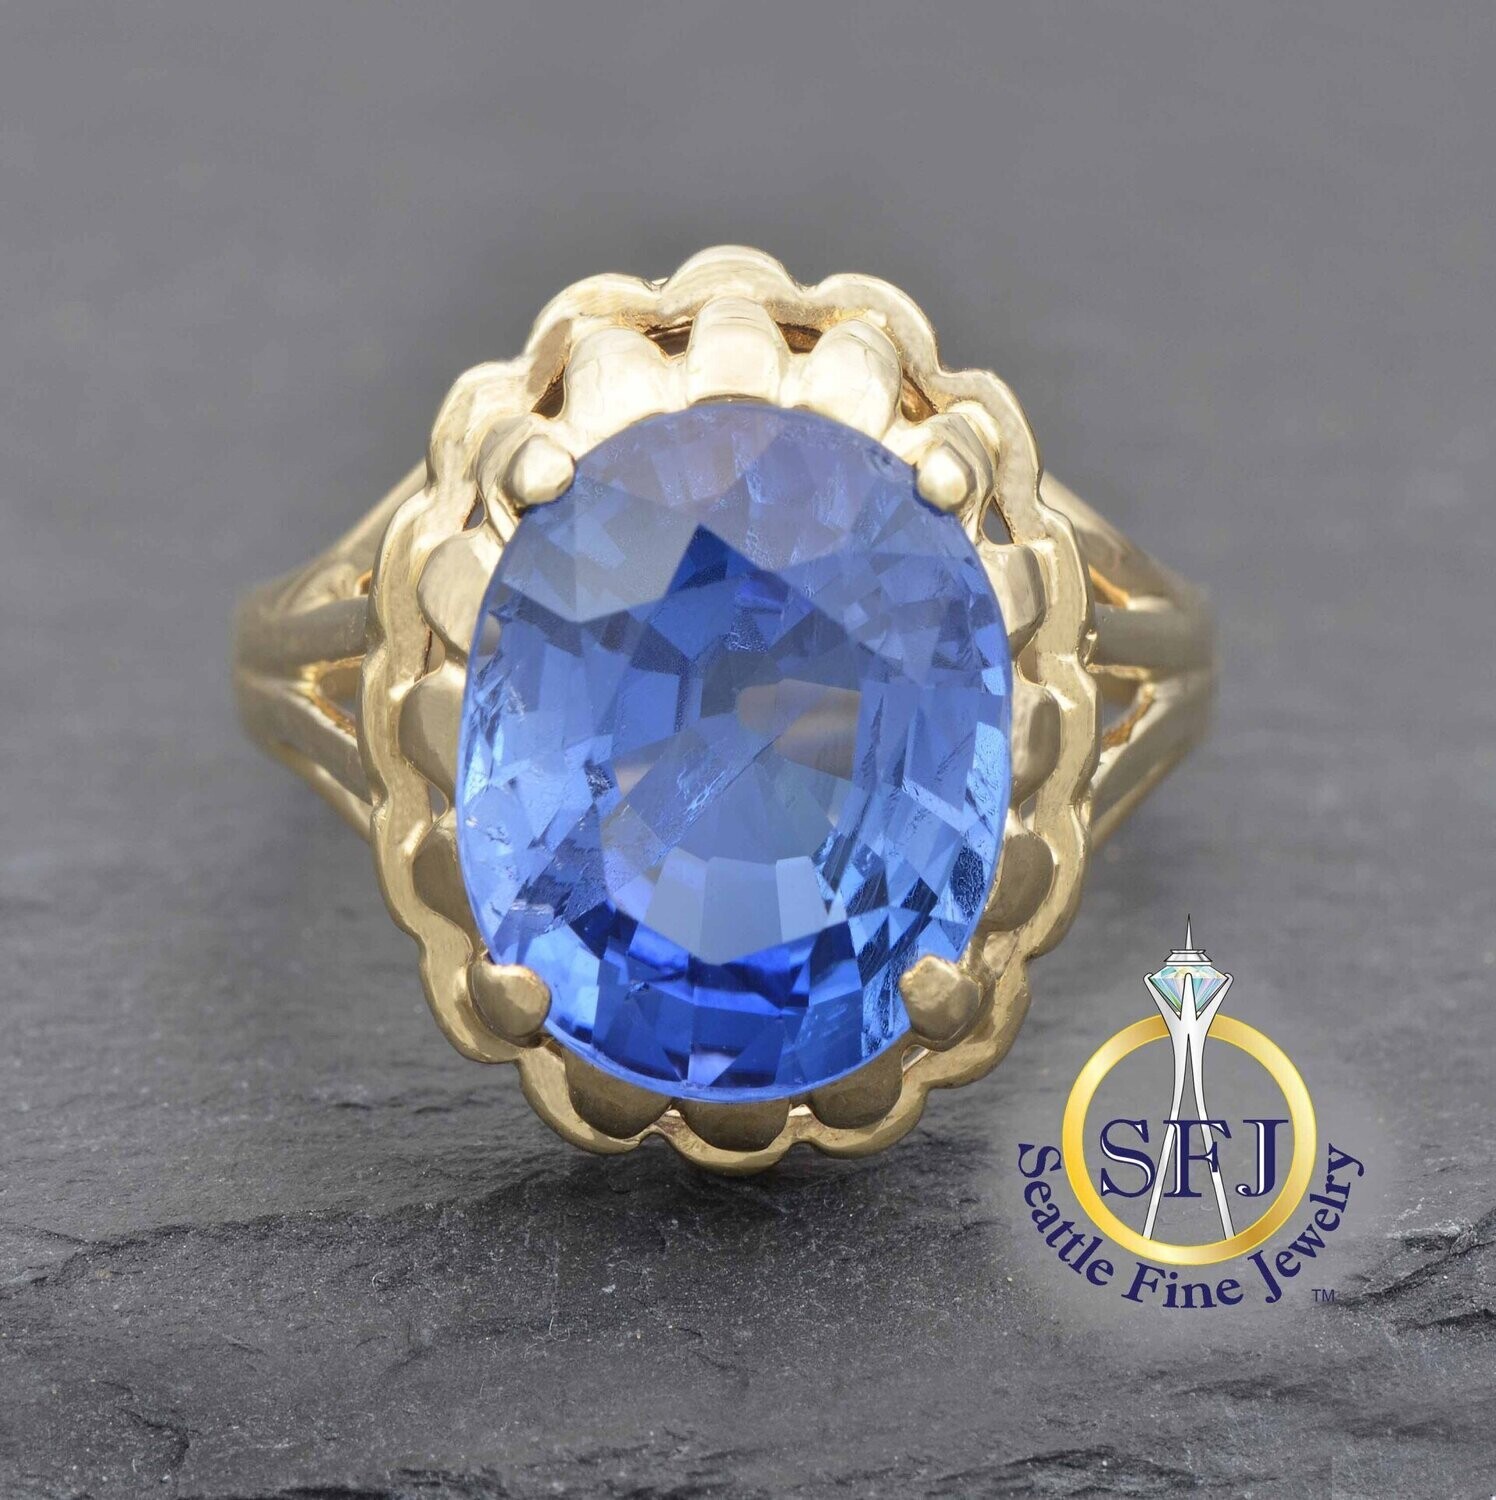 Large Sapphire 5 Carat Solitaire Fluted Ring, 10K Solid Yellow Gold